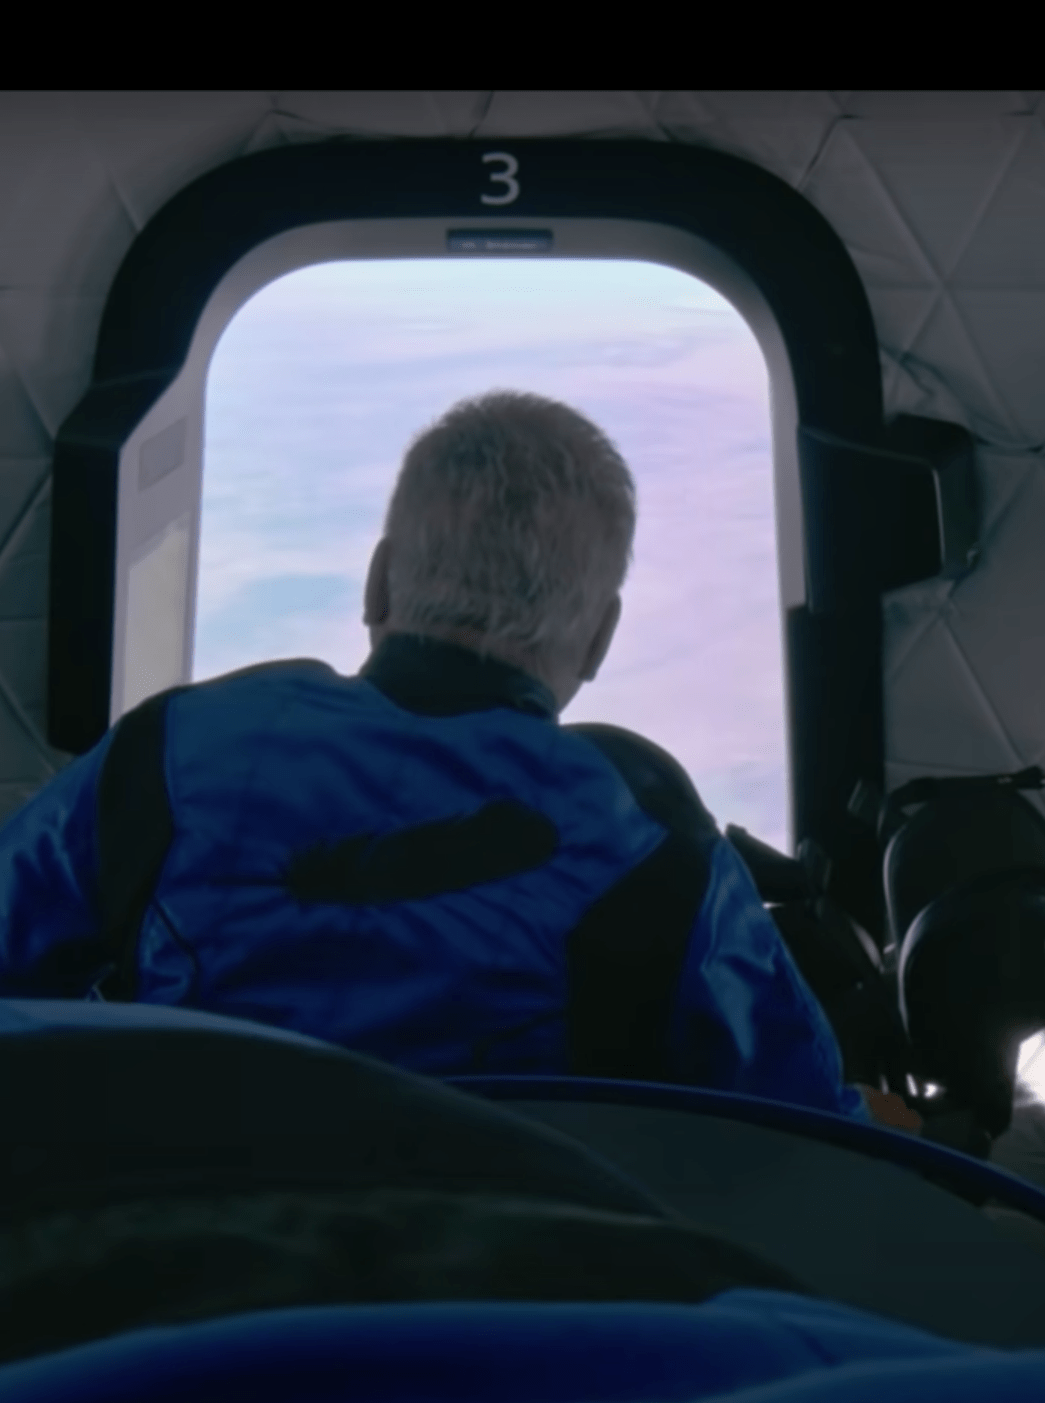 William Shatner, 90, the oldest man to travel to space, looks out the window of Blue Origin's New Shepard suborbital rocket on Oct. 13, 2021 (Blue Origin livestream)